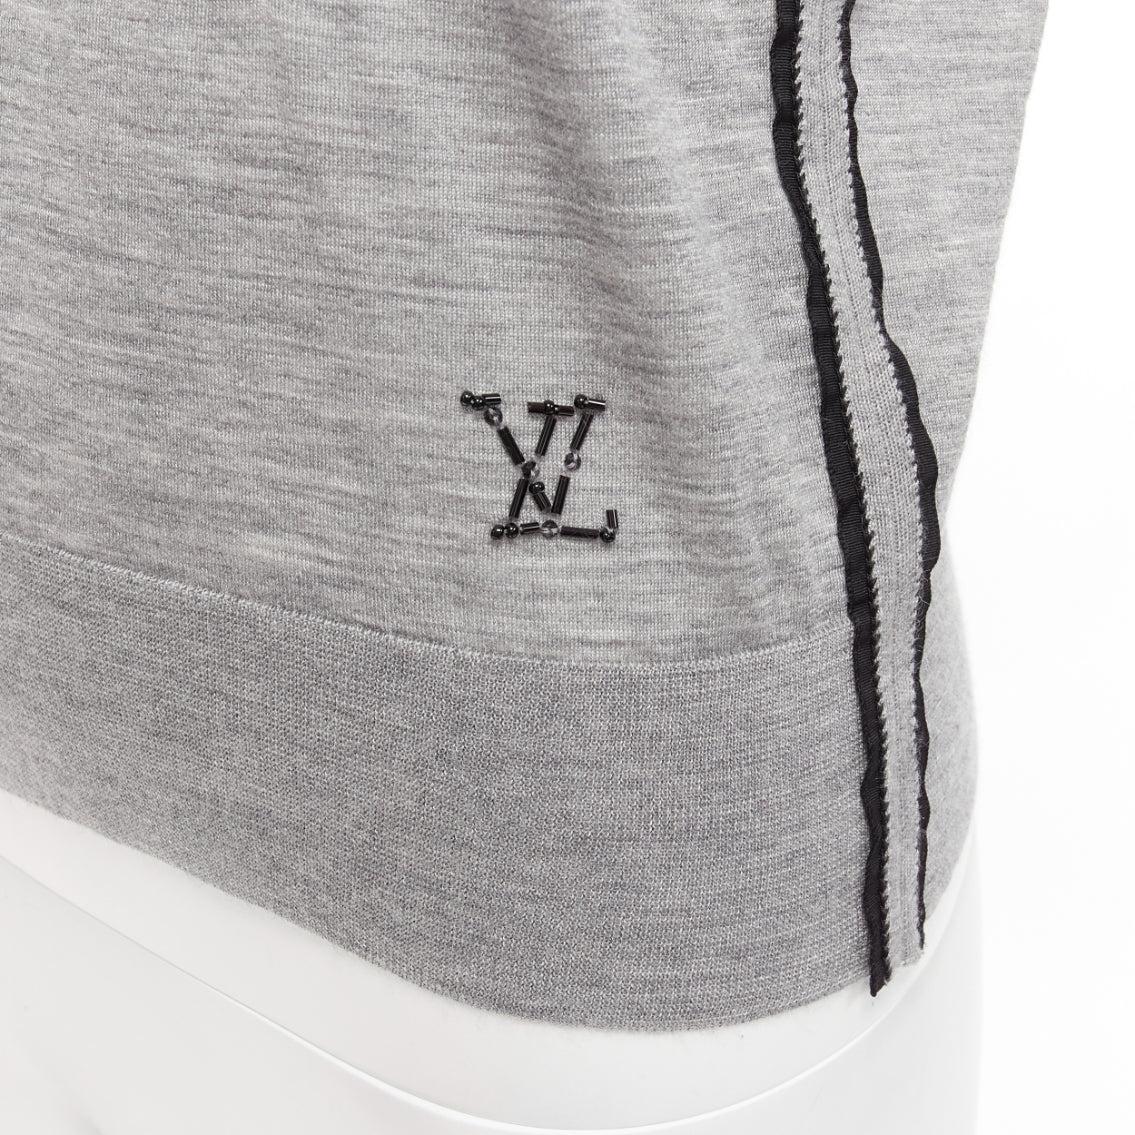 LOUIS VUITTON grey soft knit black beaded LV logo V neck pullover top
Reference: NILI/A00021
Brand: Louis Vuitton
Material: Fabric
Color: Grey, Black
Pattern: Solid
Closure: Pullover
Extra Details: LV beaded logo at left